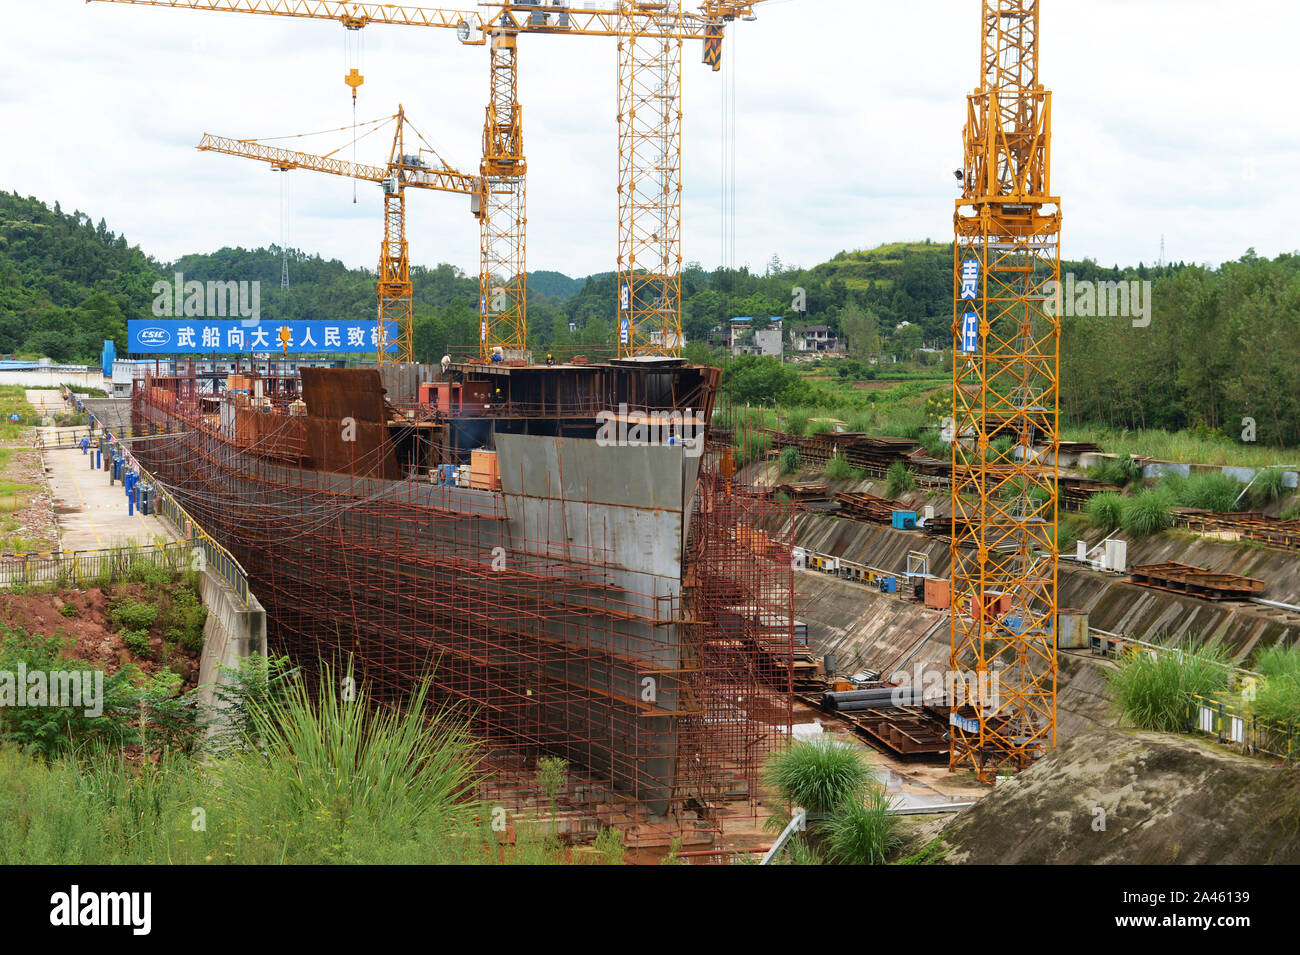 View of the constructing duplicate Titanic and its surroundings in Daying county, Suining city, southwest China's Sichuan province, 18 September 2019. Stock Photo